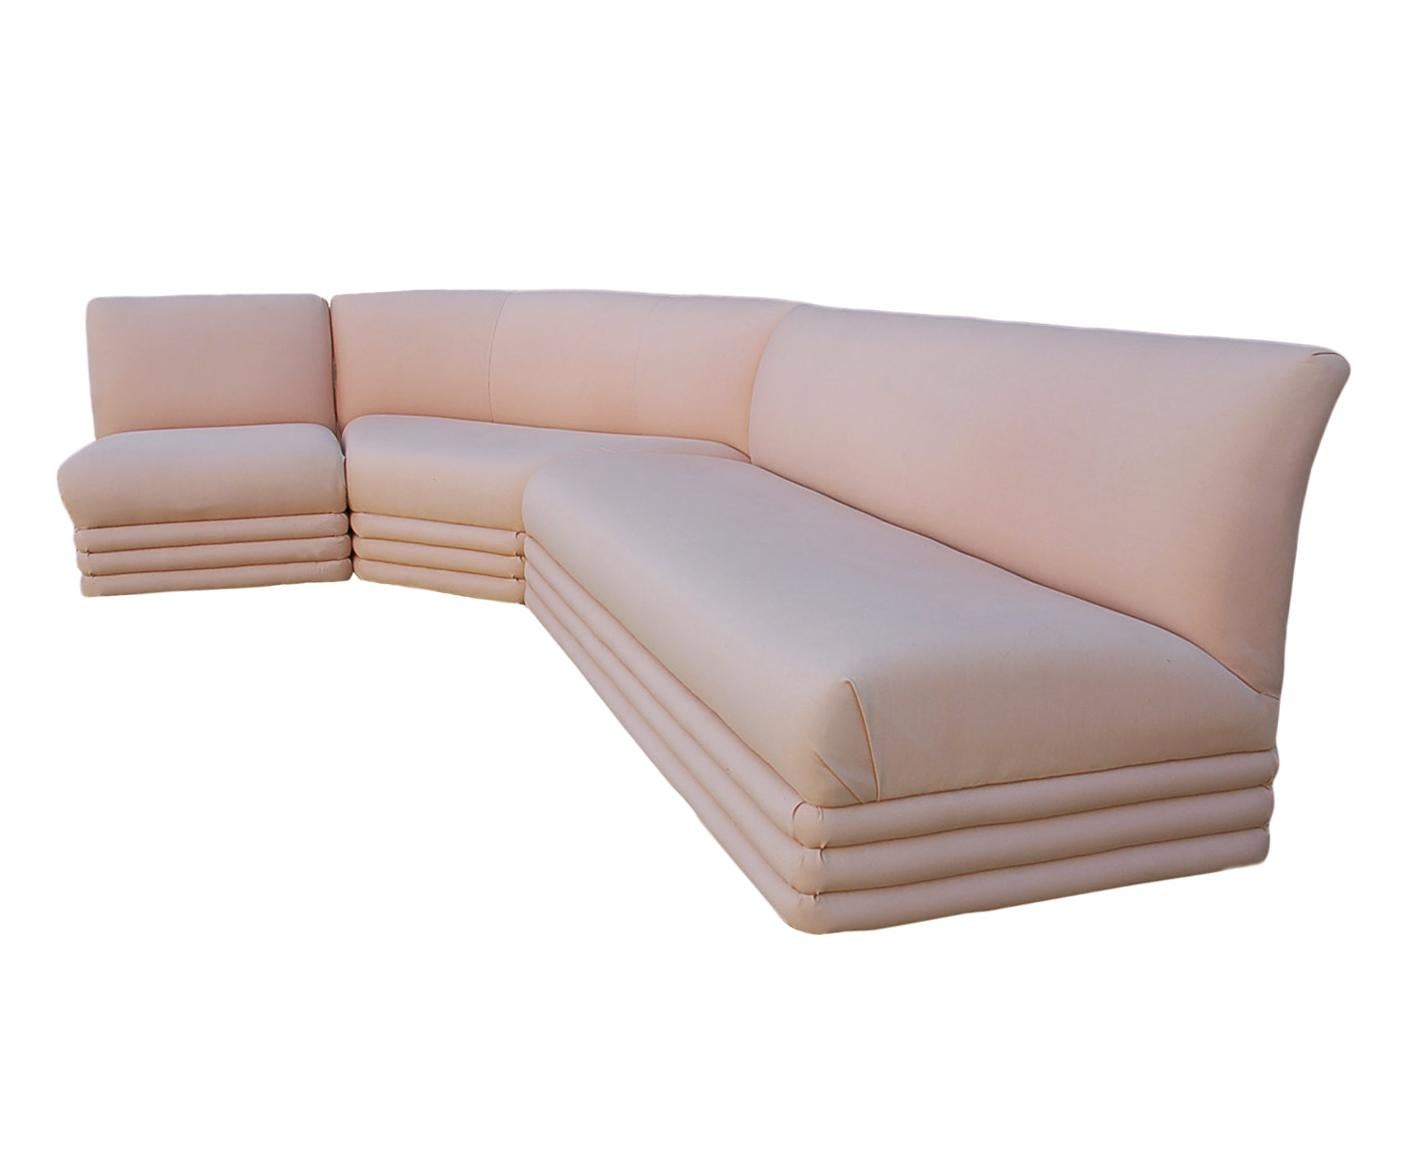 American Mid-Century Modern Curved Sectional Sofa in Pink 